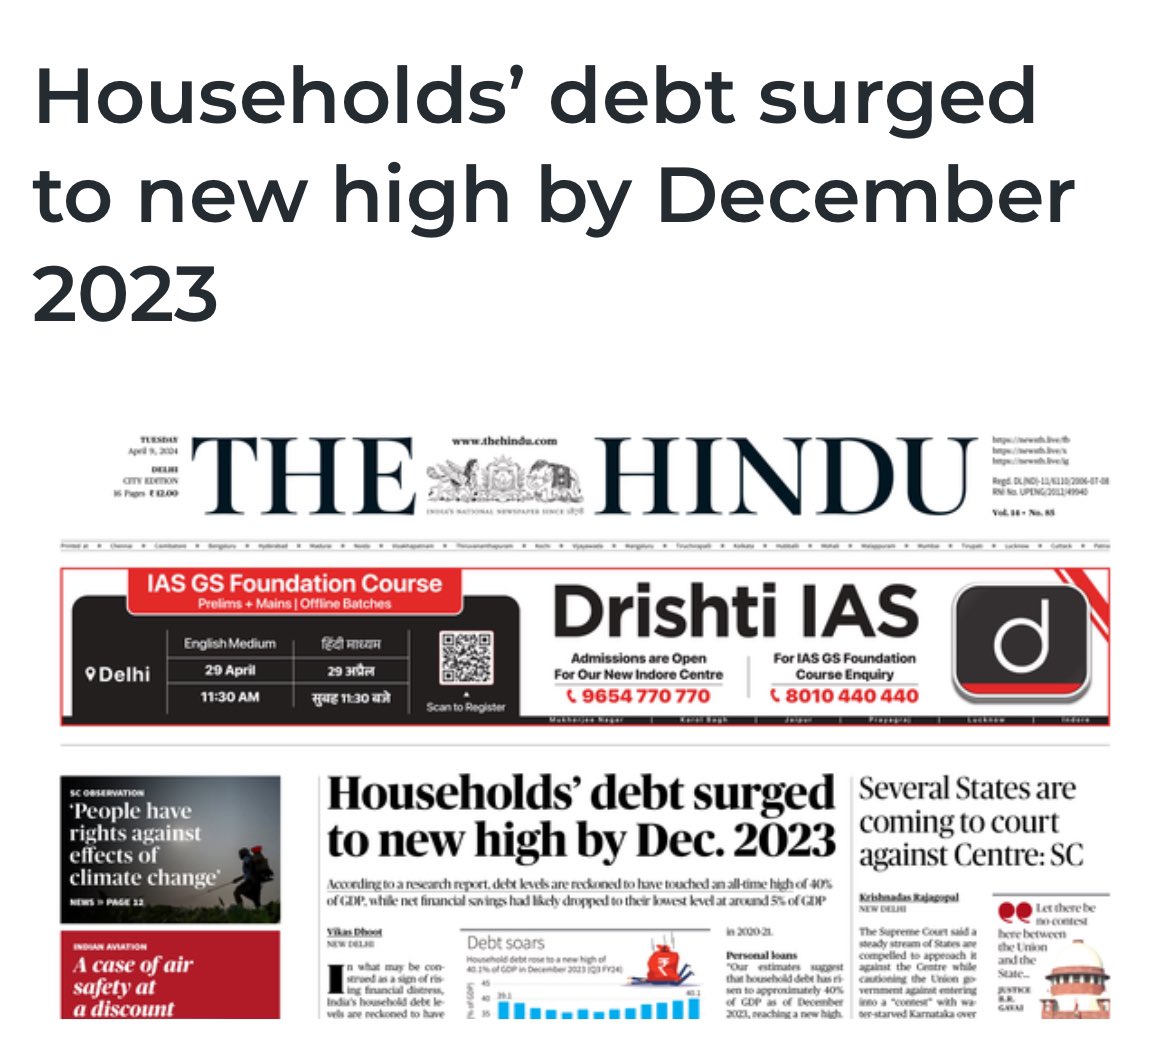 India’s household debt levels have touched an all-time high of 40% of Gross Domestic Product (GDP) by December 2023, a research report from financial services firm Motilal Oswal has said, indicating rising financial distress in the country. At the same time, net financial…